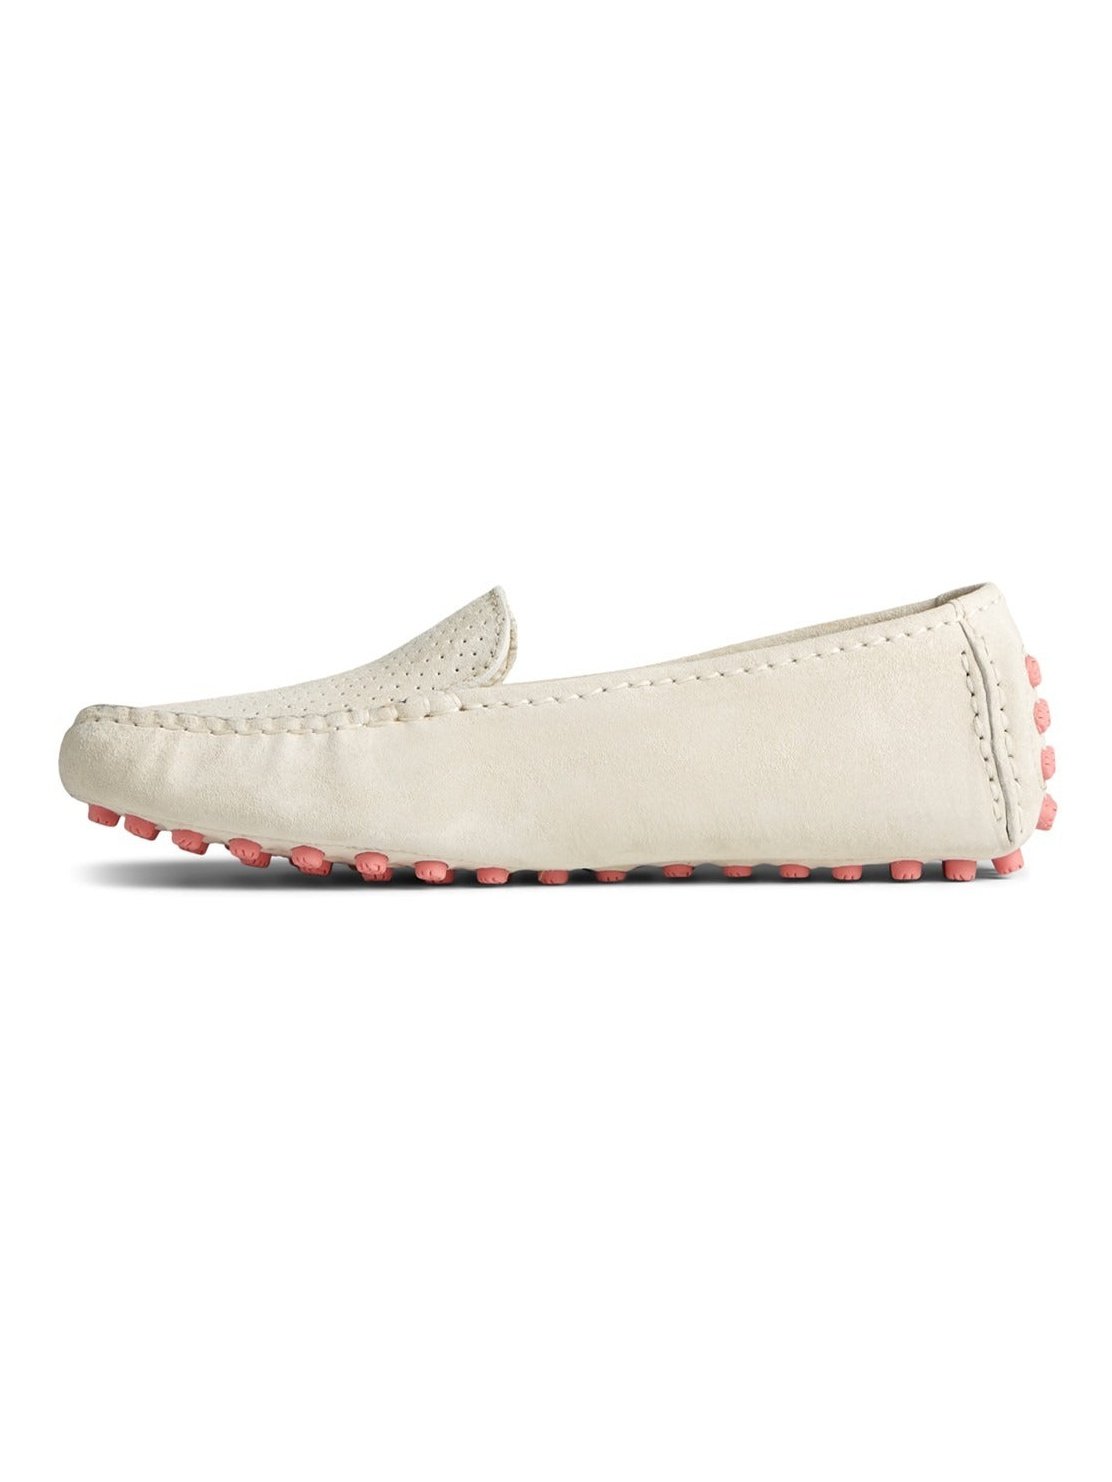 Sperry Women's Port Suede Drive Loafer White STS86093.